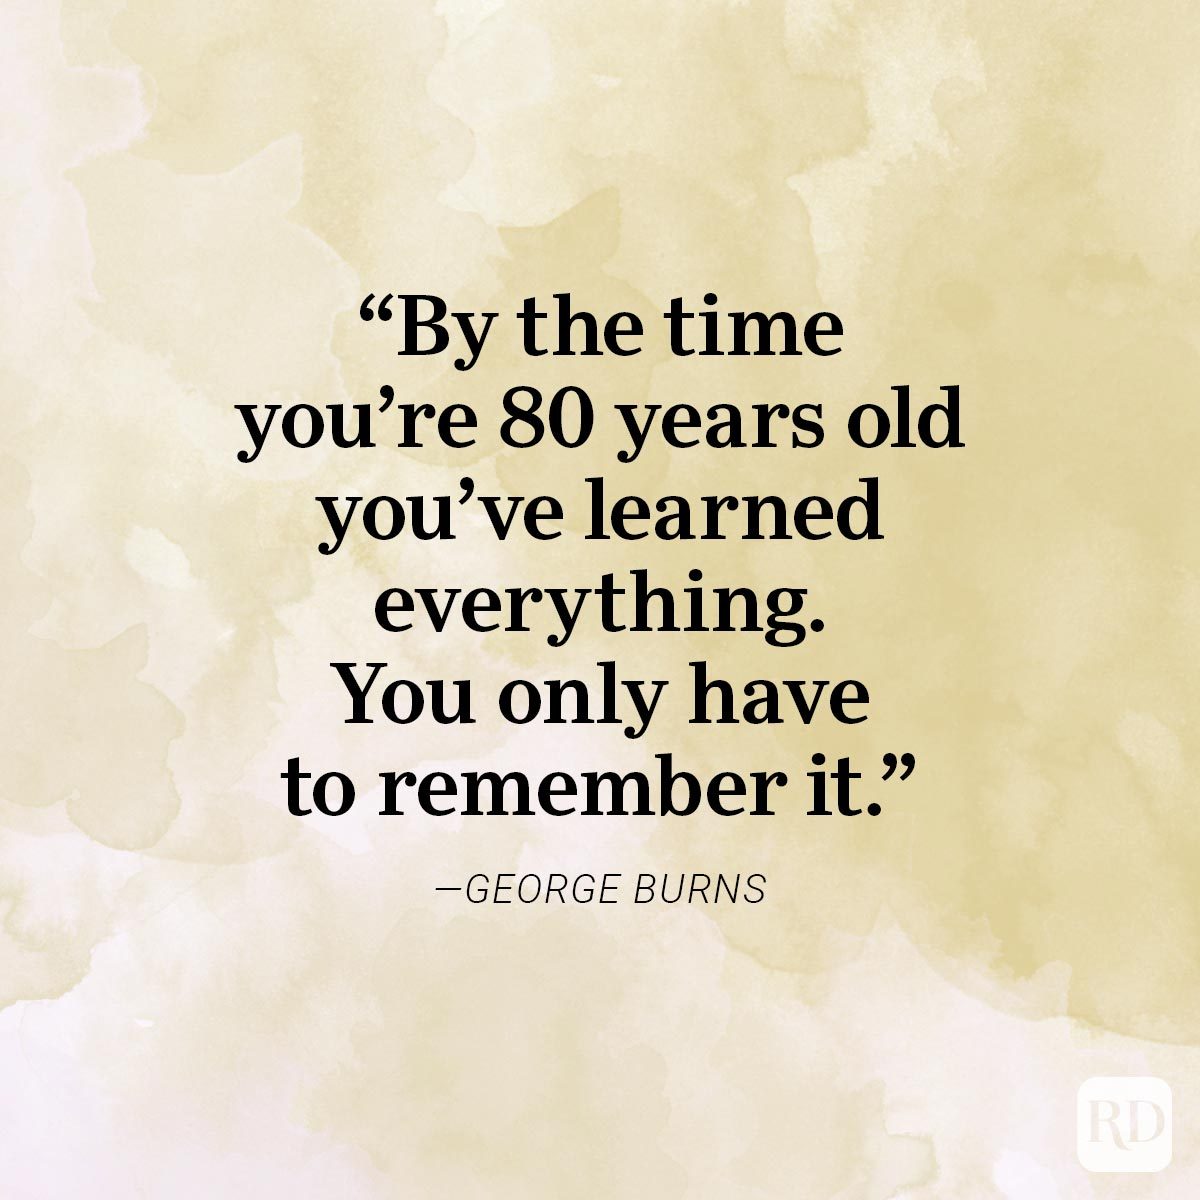 Quote aabout aging by George Burns on watercolor background